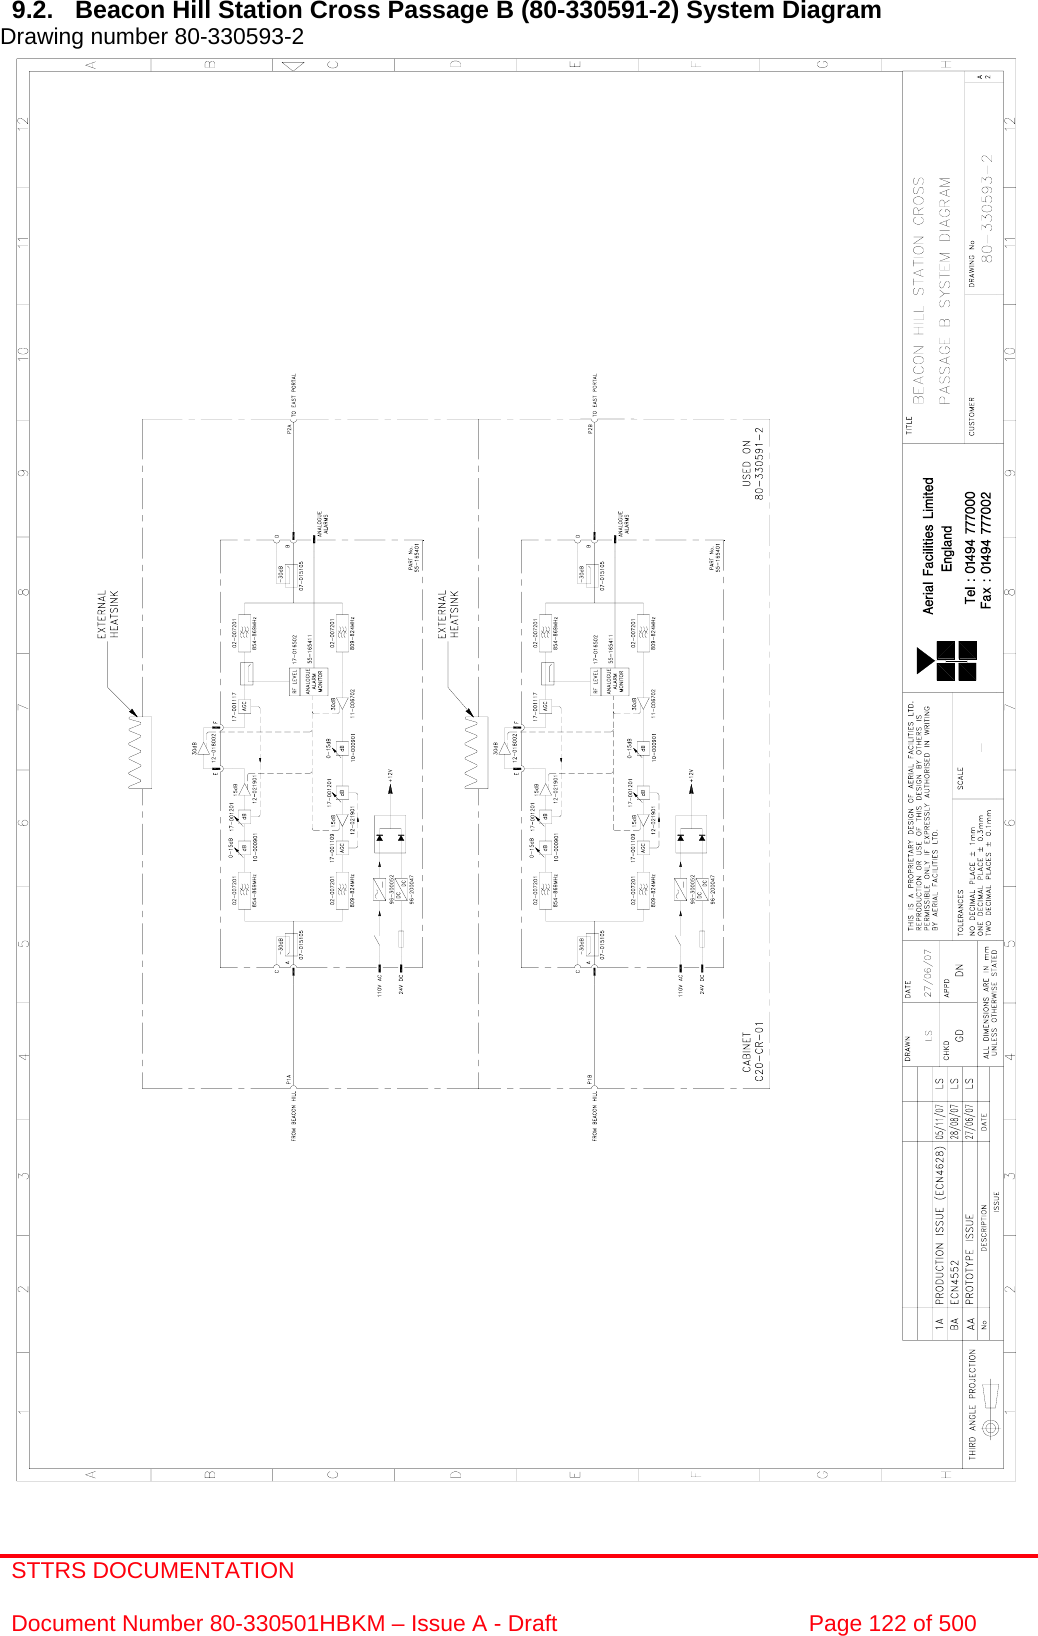 STTRS DOCUMENTATION  Document Number 80-330501HBKM – Issue A - Draft  Page 122 of 500   9.2.  Beacon Hill Station Cross Passage B (80-330591-2) System Diagram Drawing number 80-330593-2                                                        